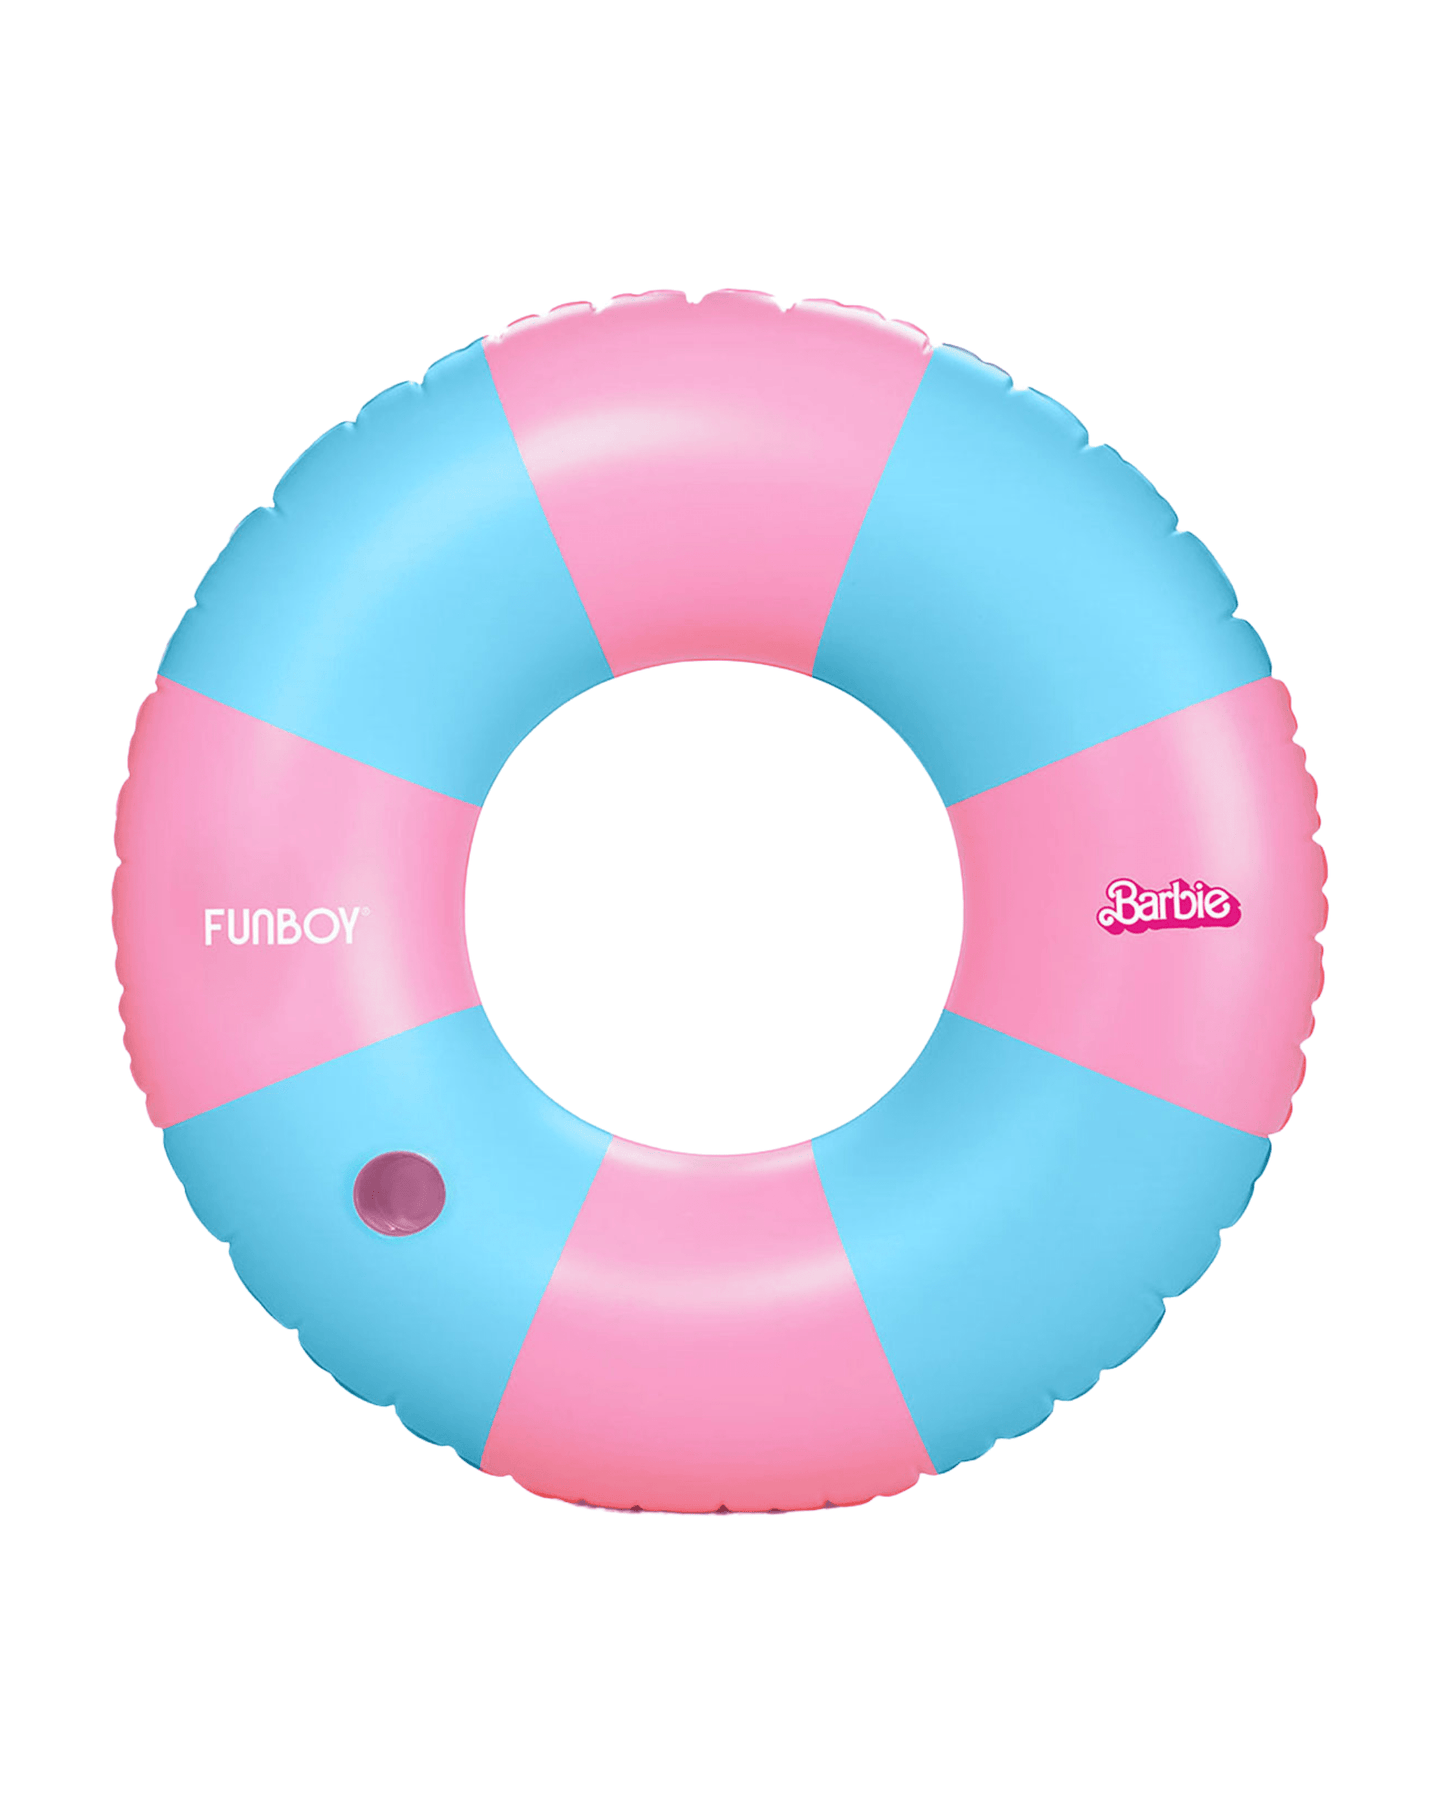 Barbie Movie Official Inflatable Tube Pool Float - Pink & Blue